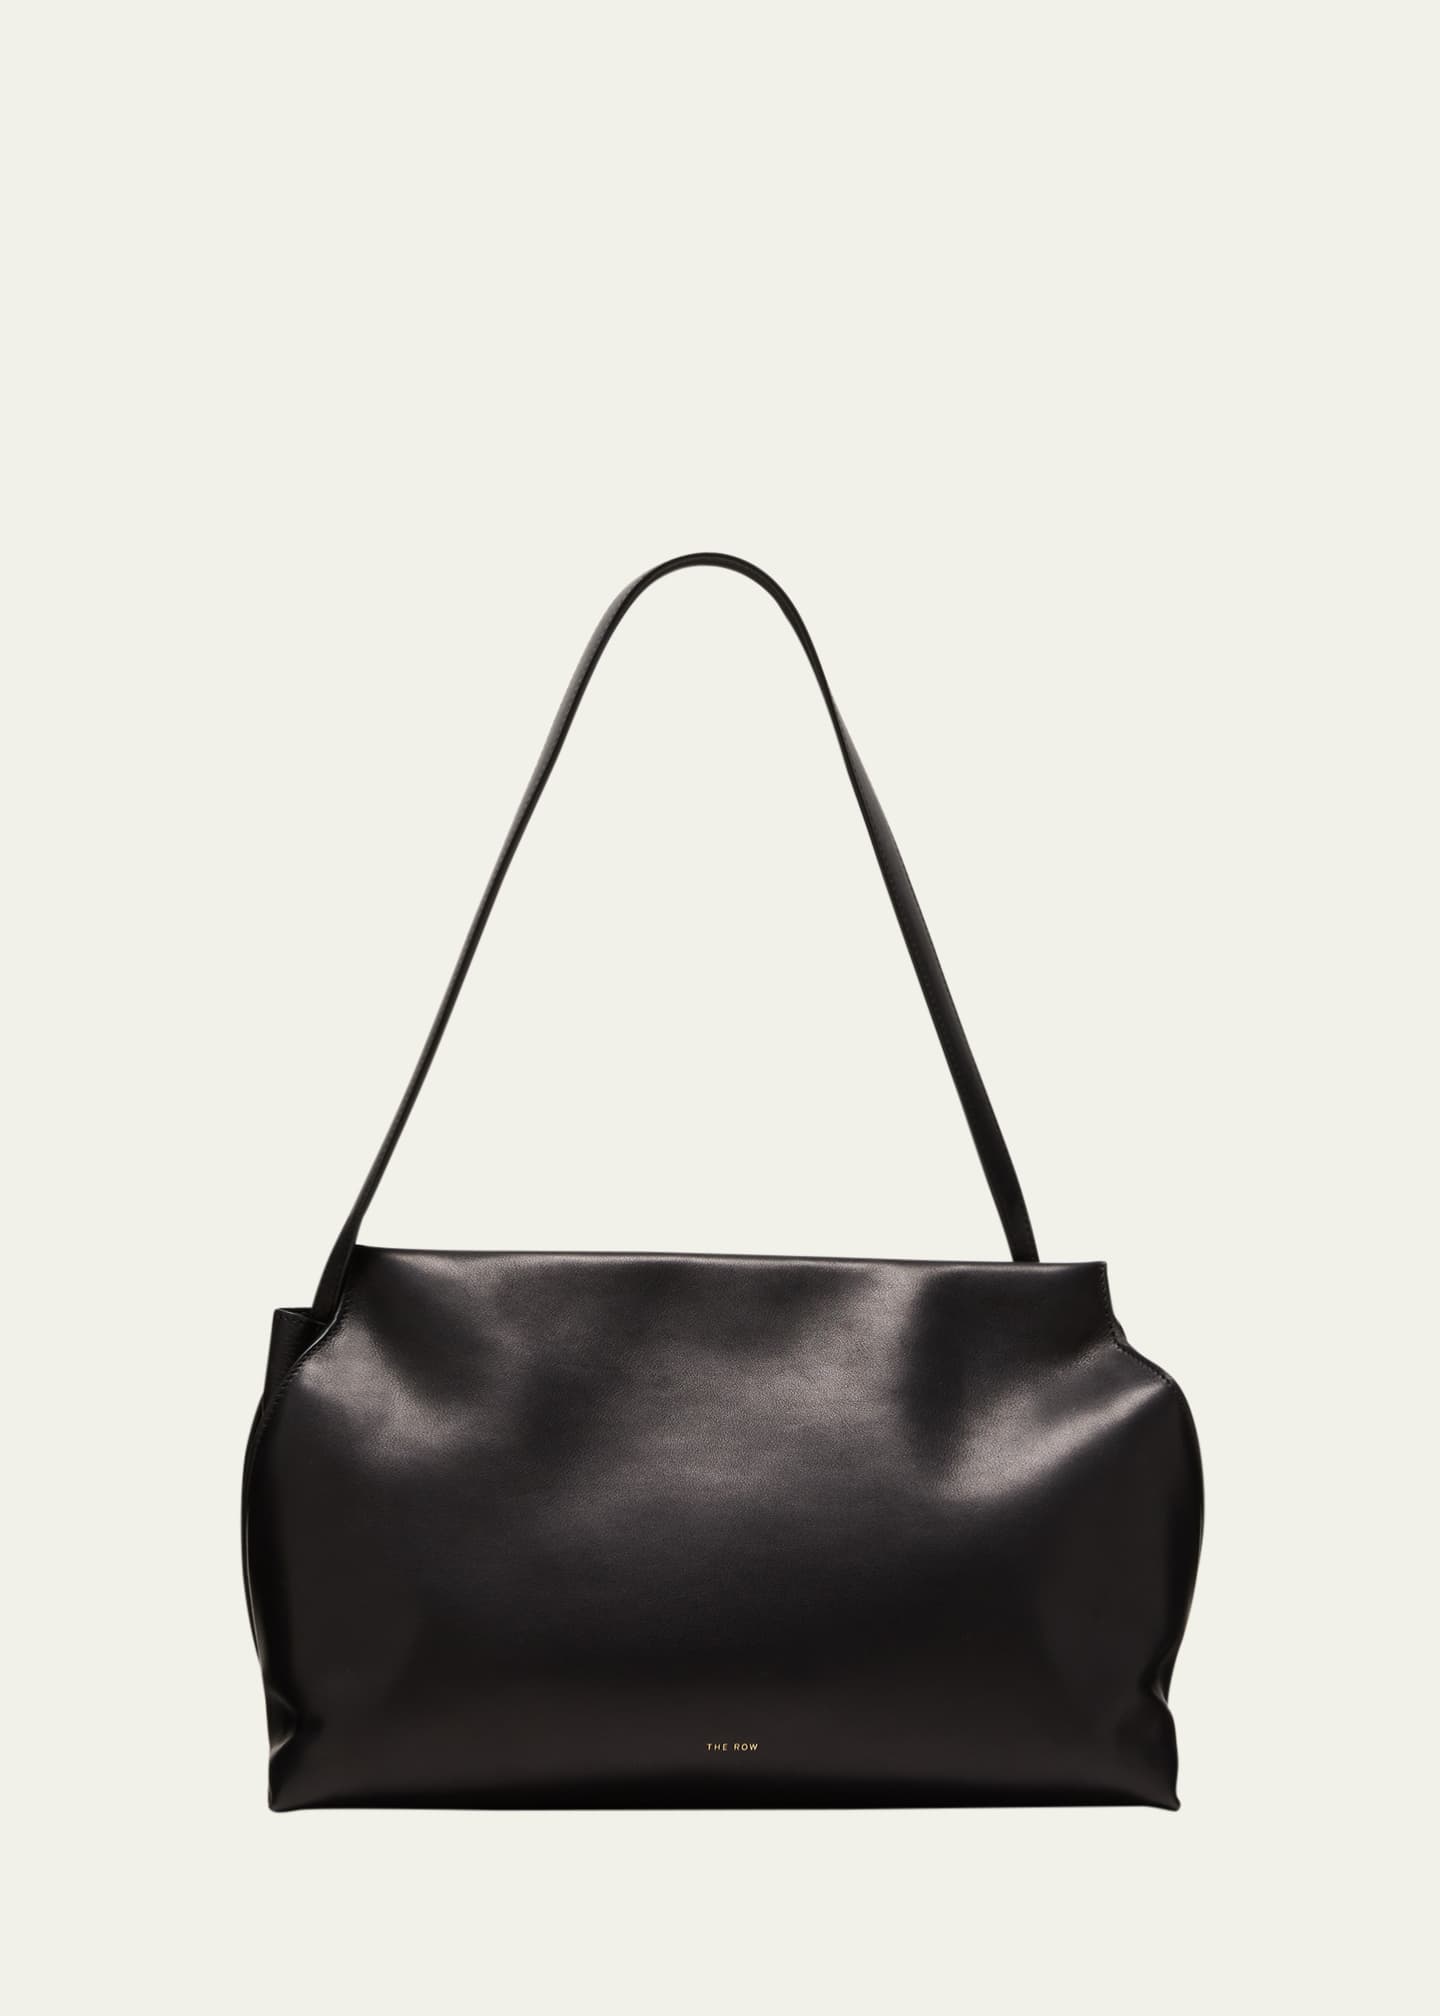 THE ROW Sienna Shoulder Bag in Saddle Leather - Bergdorf Goodman